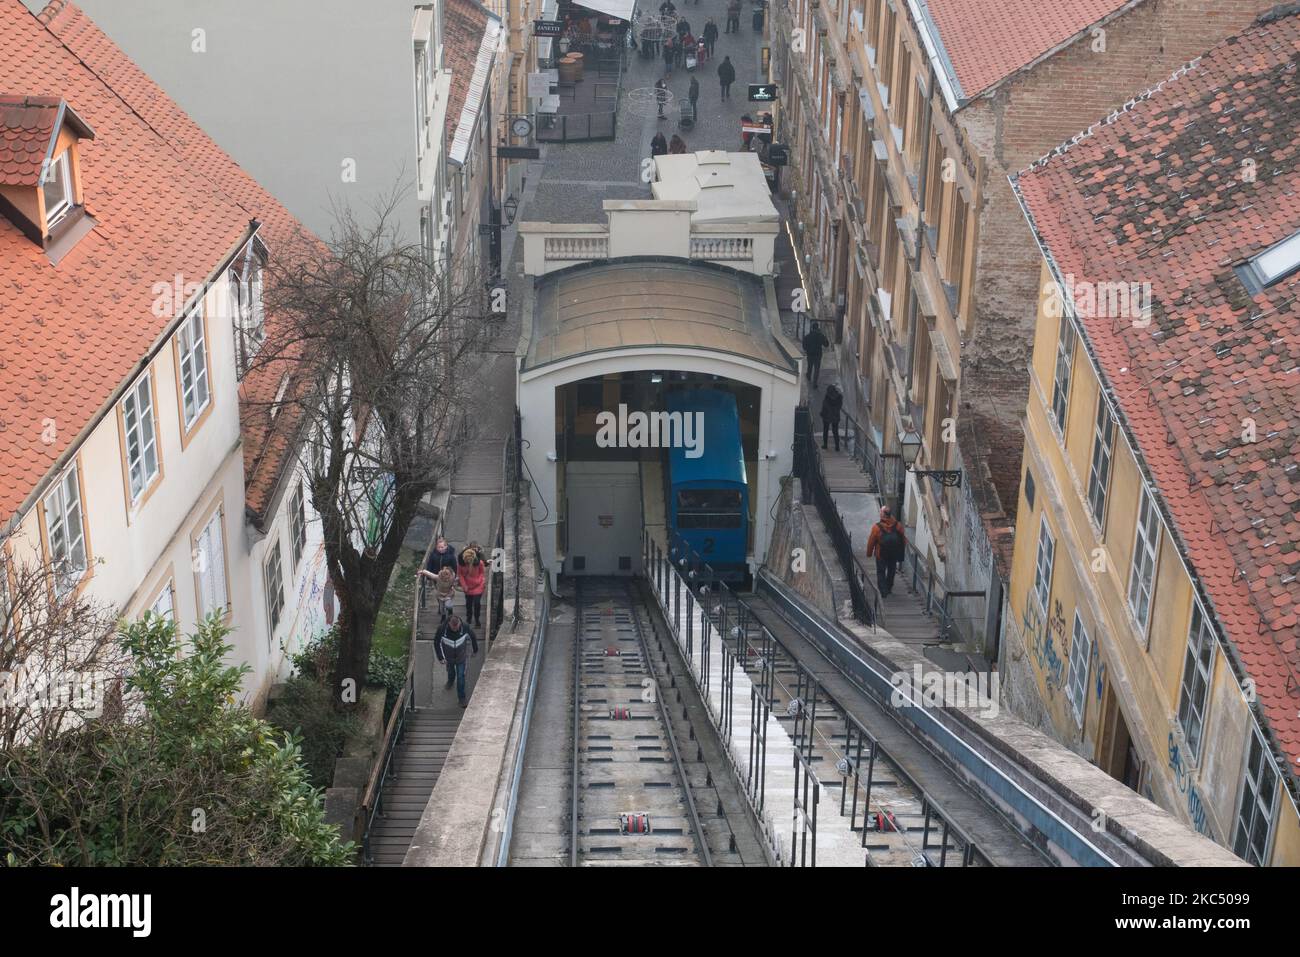 ZAGREB, CROATIA-January 4, 2020: The Zagreb Funicular in Tomic Street, connecting Ilica with Strossmayer promenade to the north. Its 66-metre track ma Stock Photo